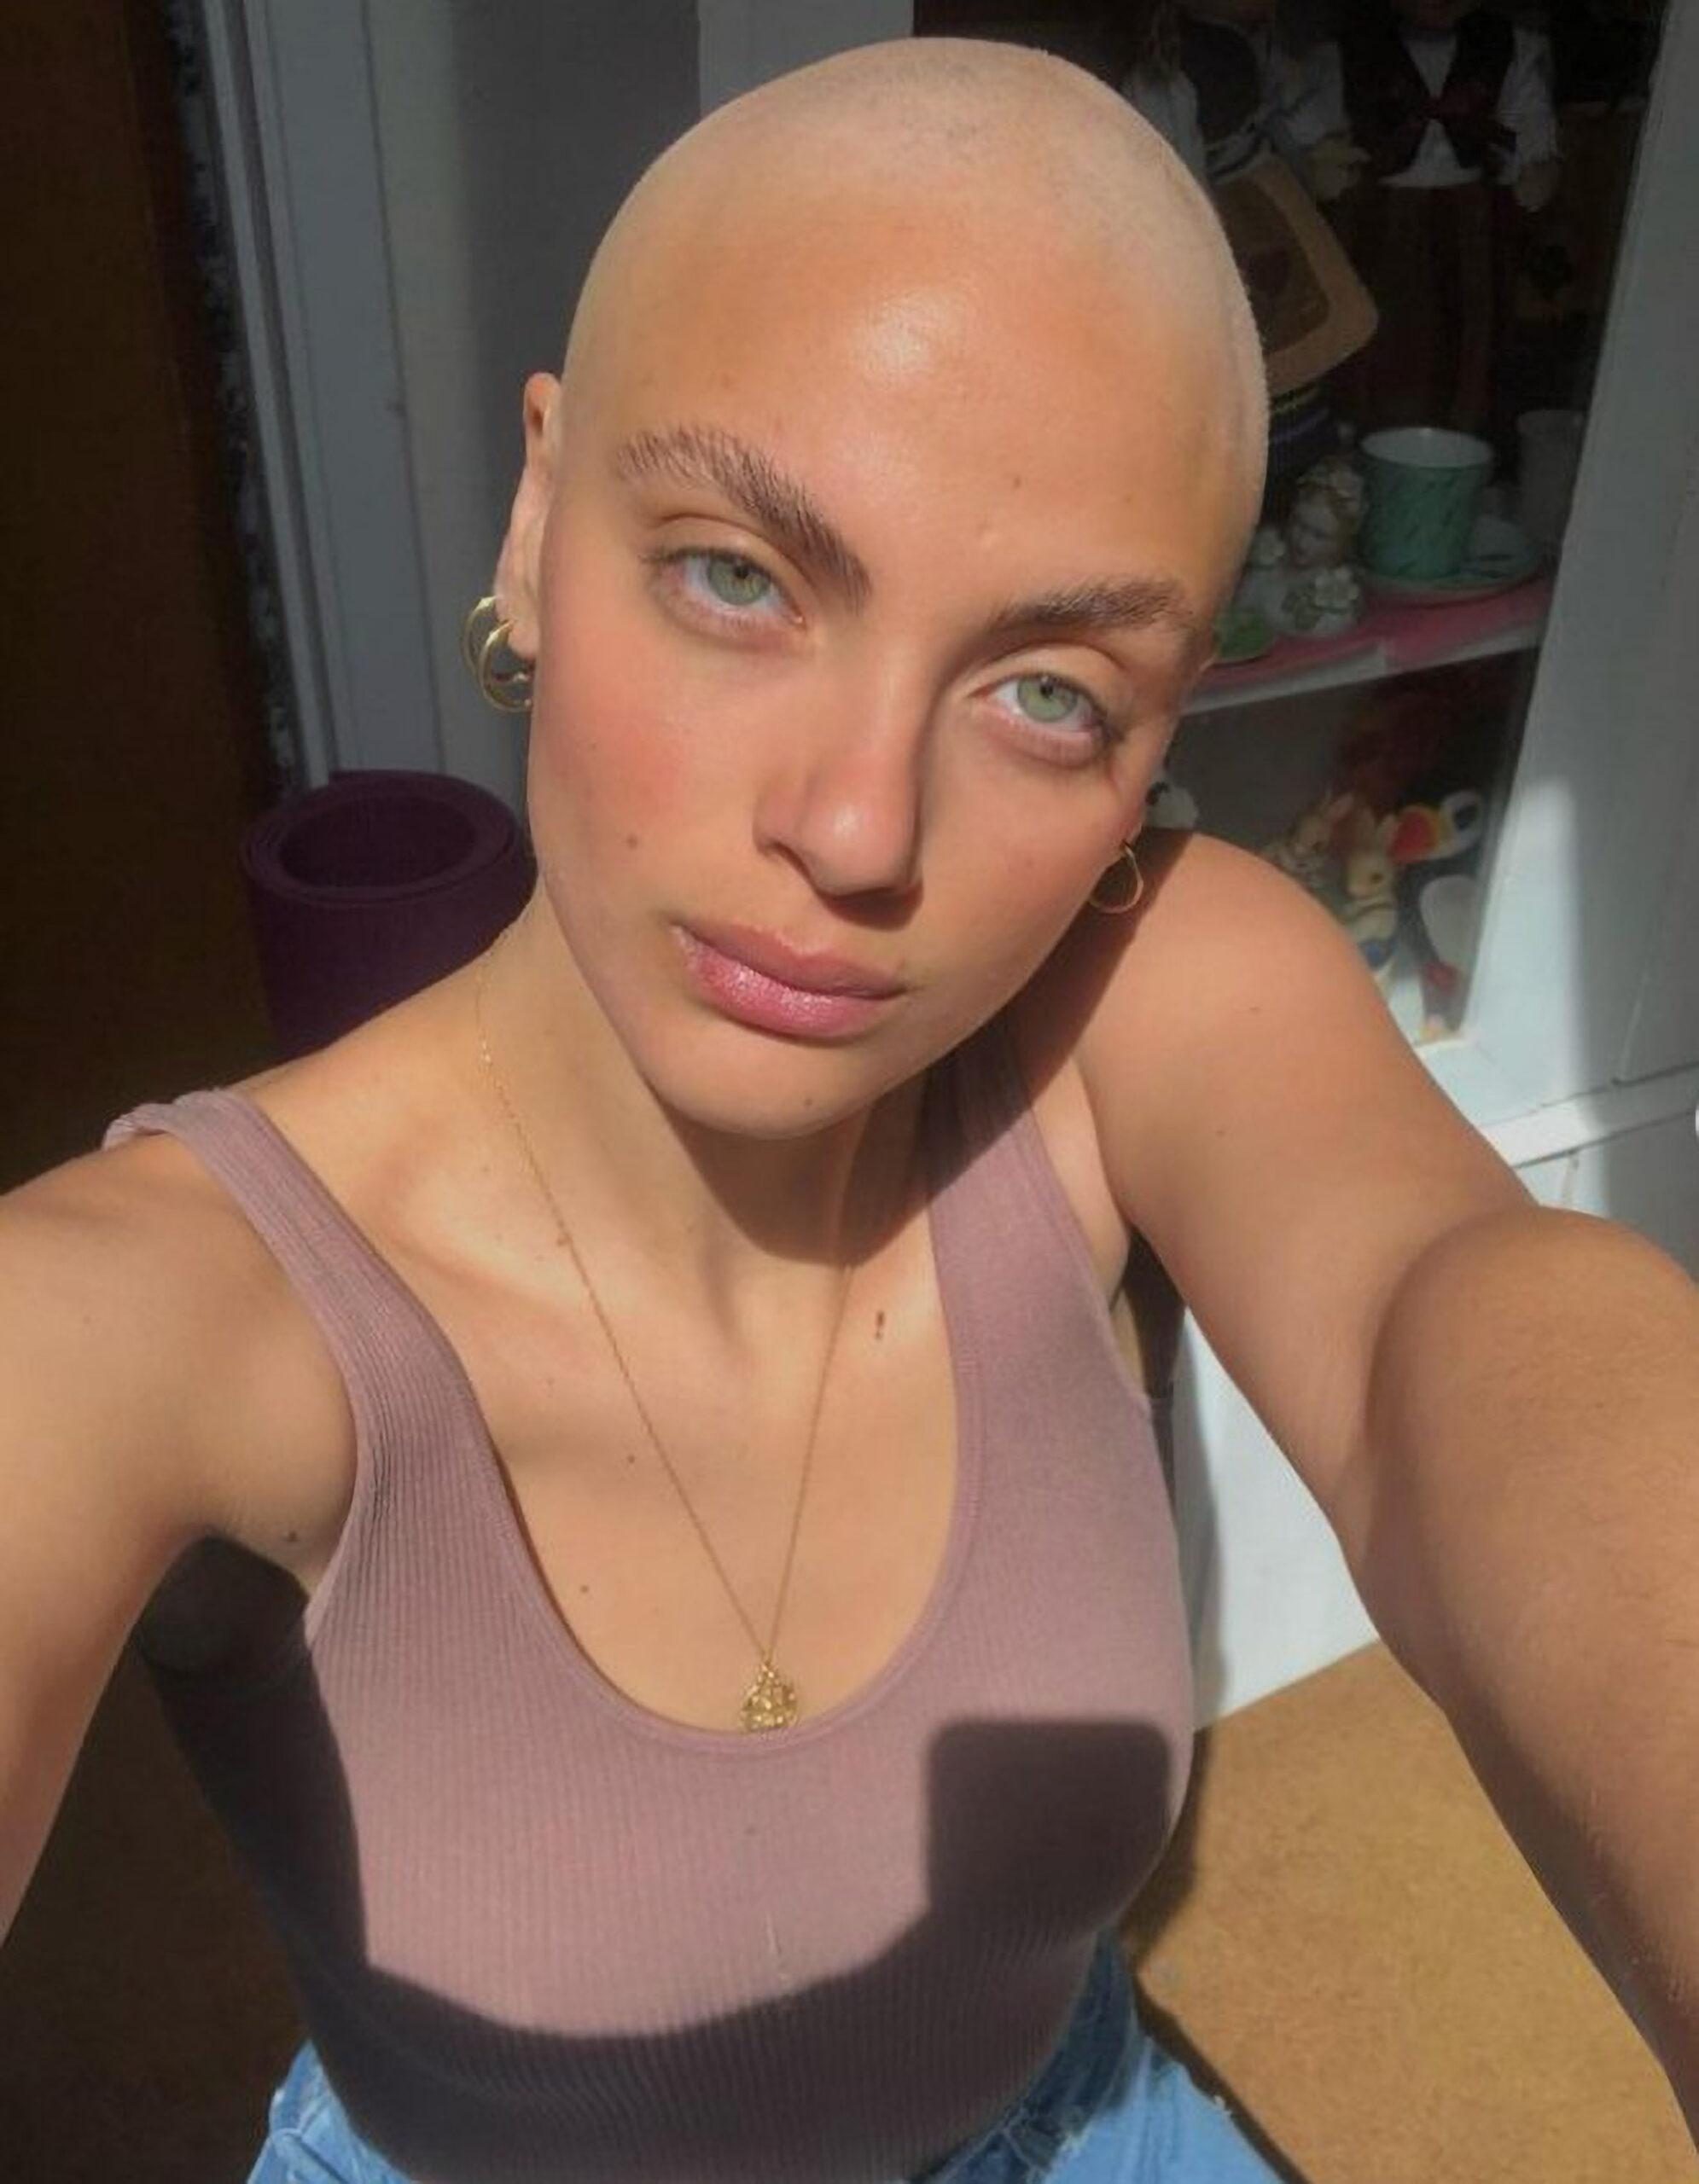 Read more about the article BALD IS BEAUTIFUL: Model Shaves Head After Battle With Alopecia